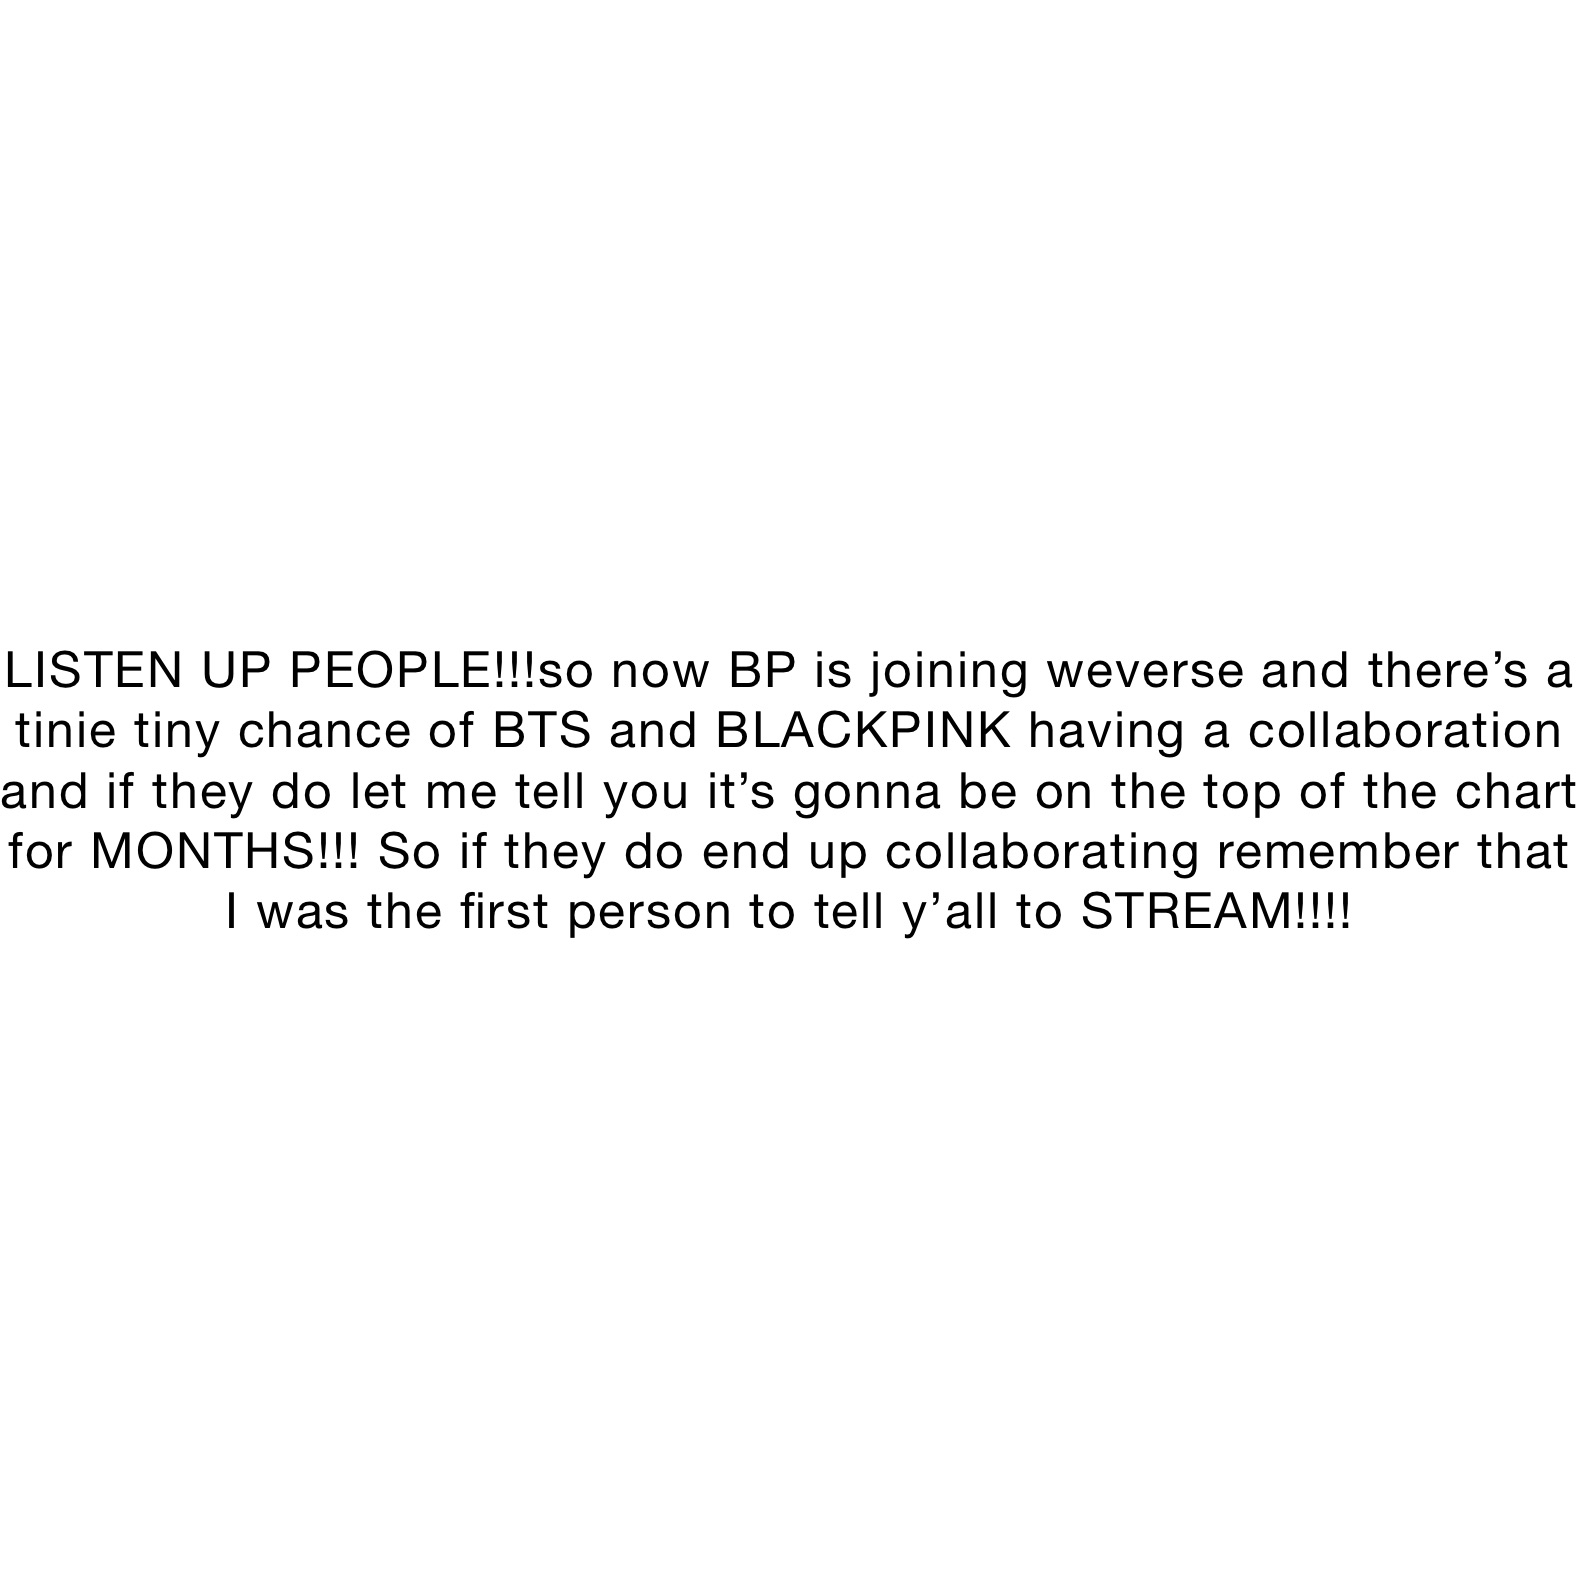 LISTEN UP PEOPLE!!!so now BP is joining weverse and there’s a tinie tiny chance of BTS and BLACKPINK having a collaboration and if they do let me tell you it’s gonna be on the top of the chart for MONTHS!!! So if they do end up collaborating remember that I was the first person to tell y’all to STREAM!!!!